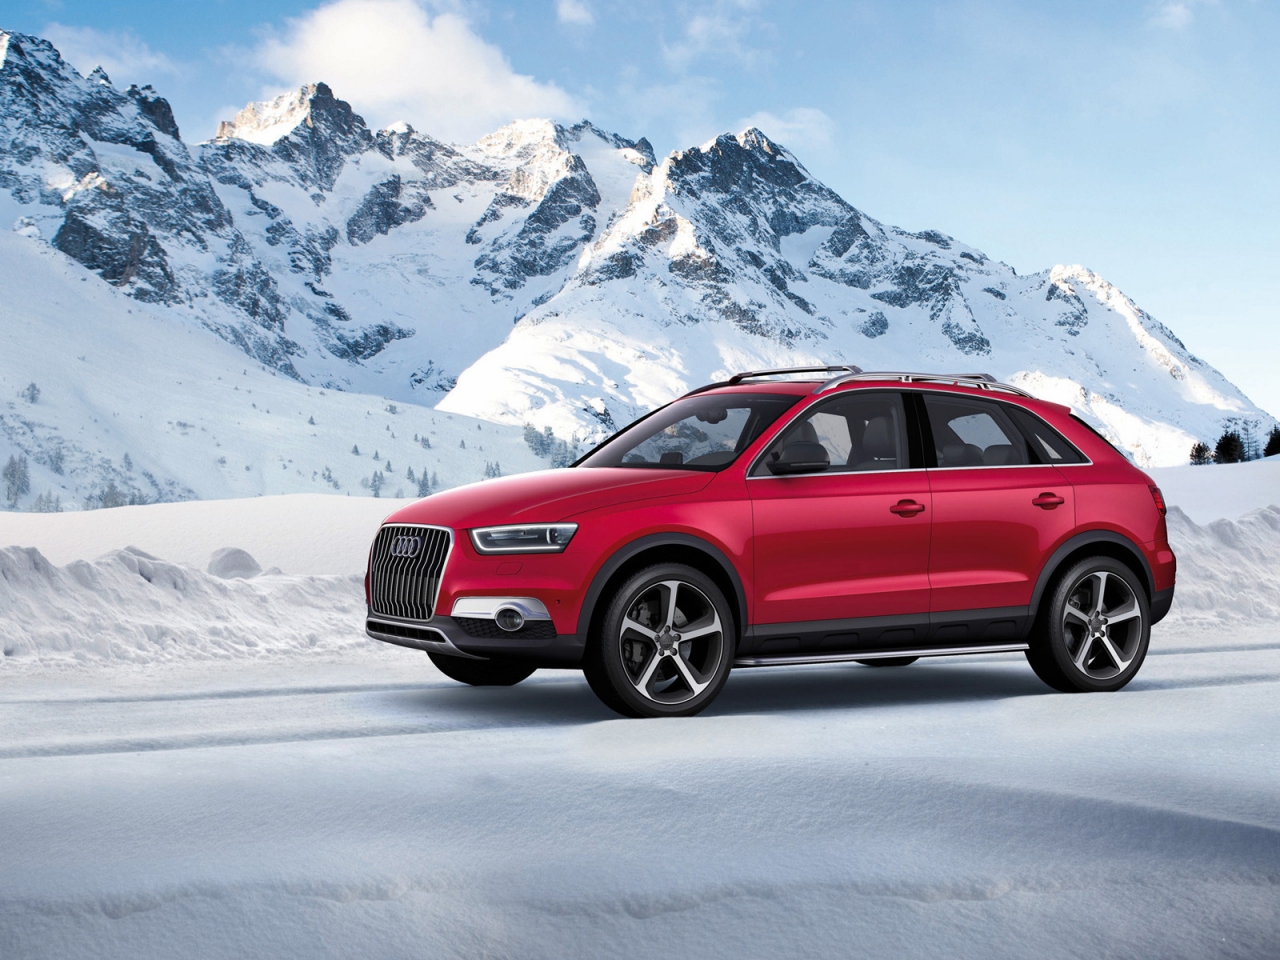 Audi Q3 Vail 2012 for 1280 x 960 resolution